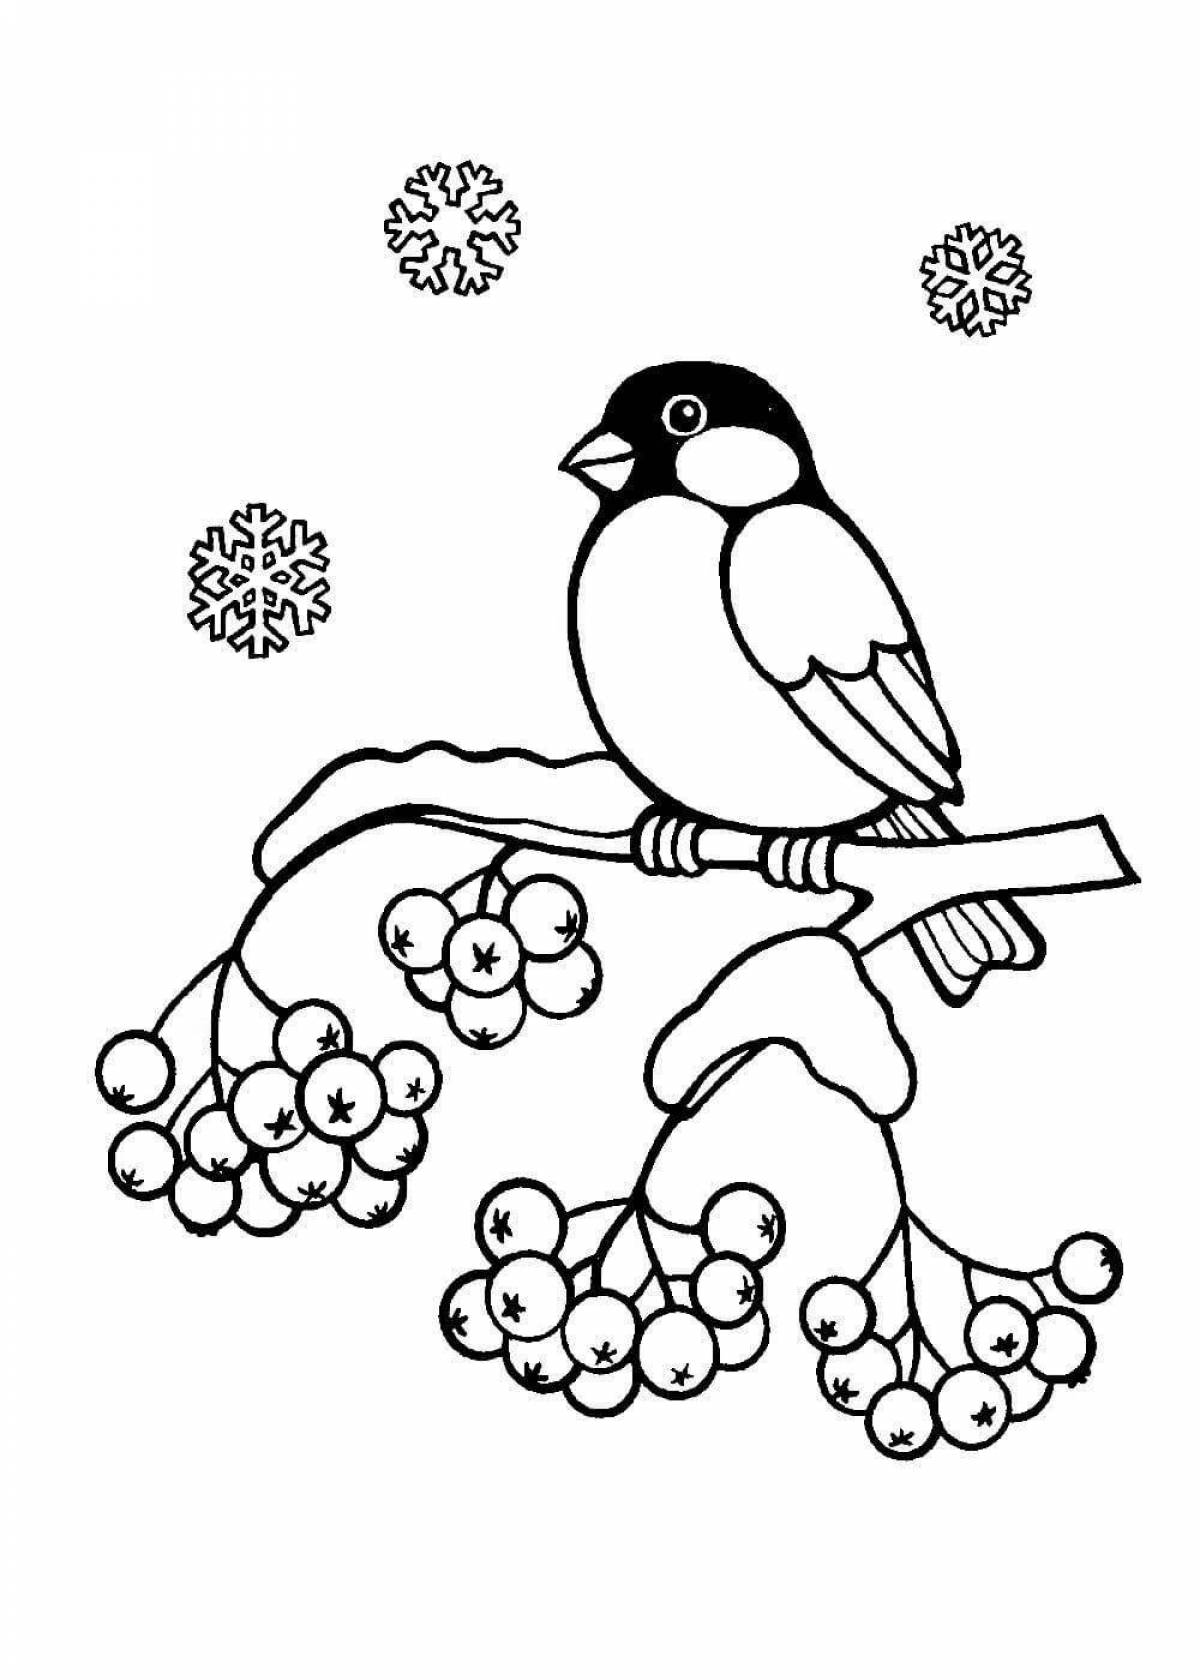 Artistic drawing of a bullfinch on a branch